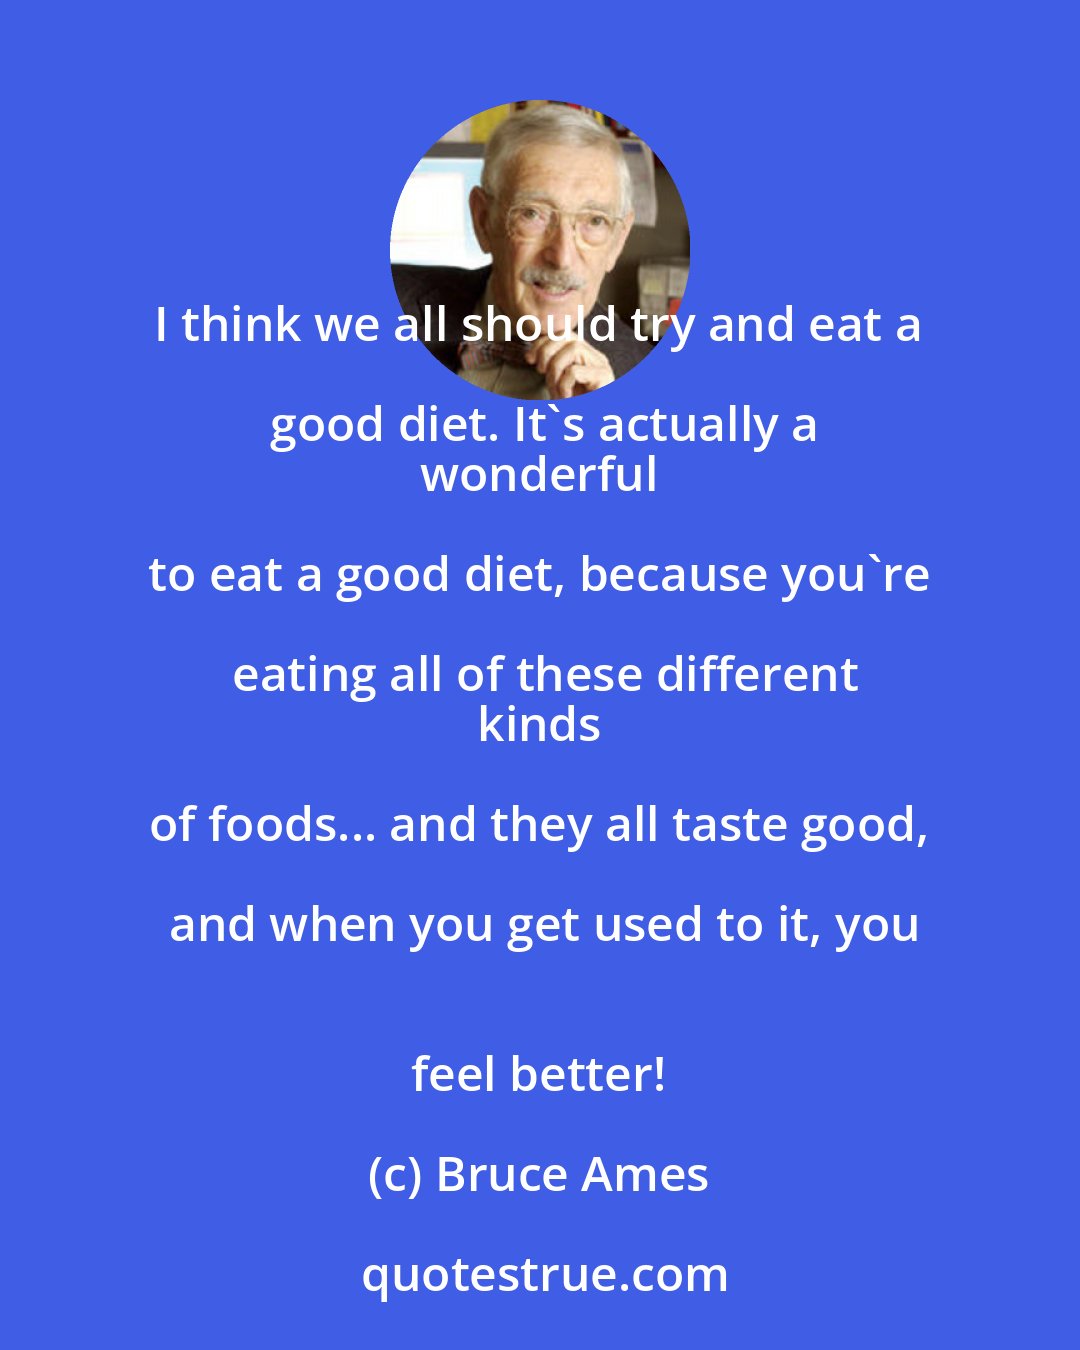 Bruce Ames: I think we all should try and eat a good diet. It's actually a
 wonderful to eat a good diet, because you're eating all of these different
 kinds of foods... and they all taste good, and when you get used to it, you
 feel better!